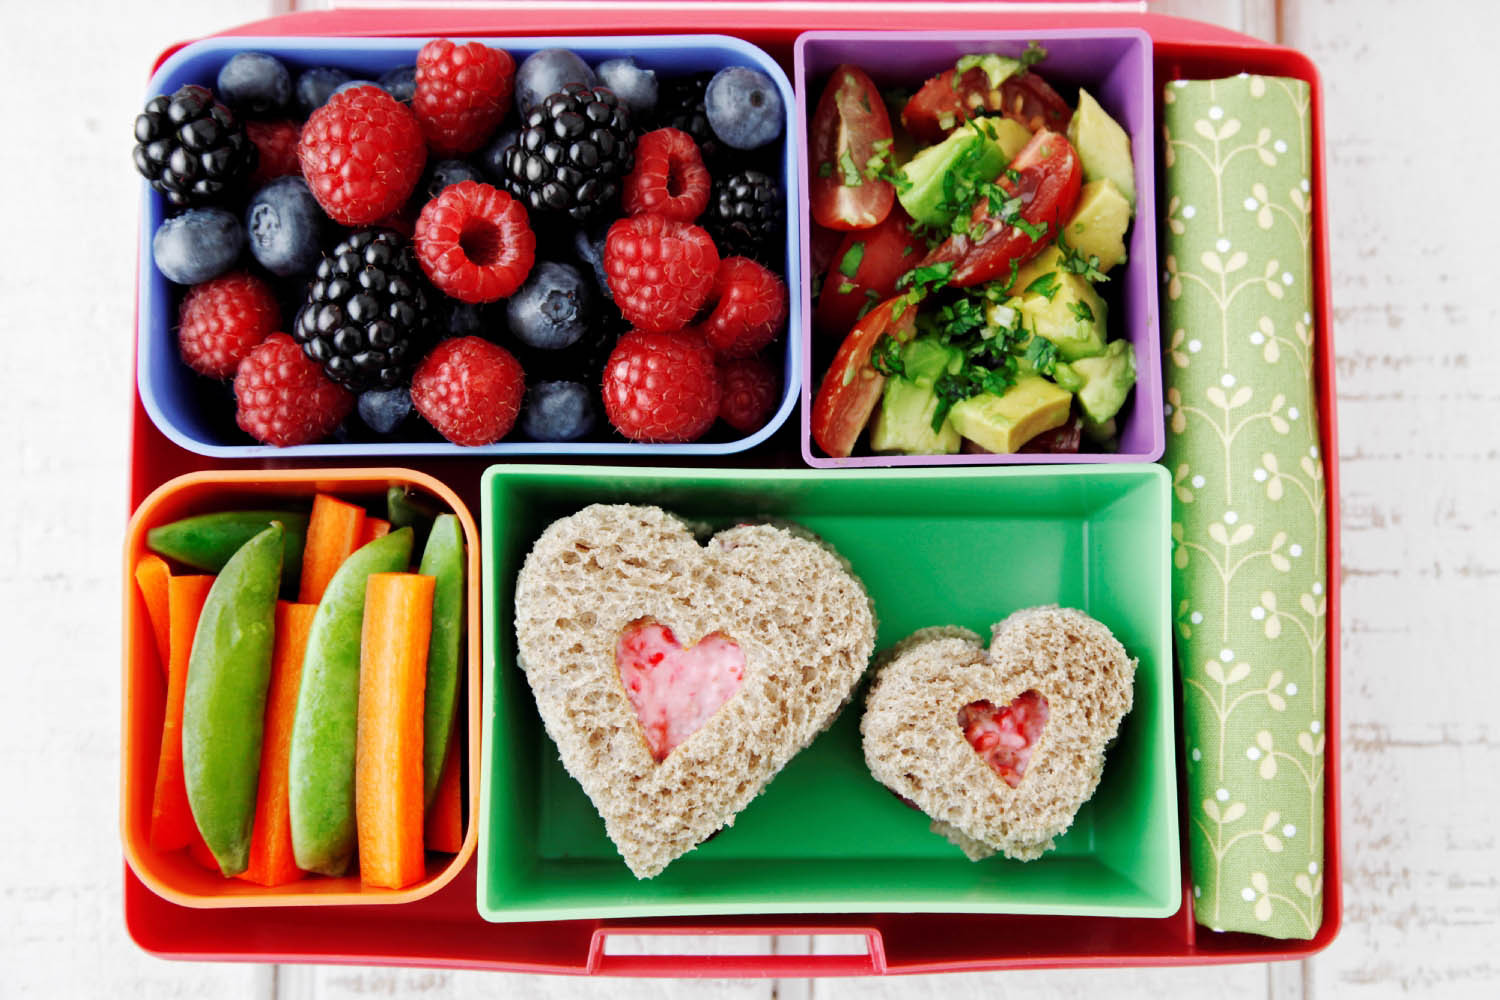 Bento Box Recipes For Kids
 Fun and Easy Lunchtime Bento Box ideas